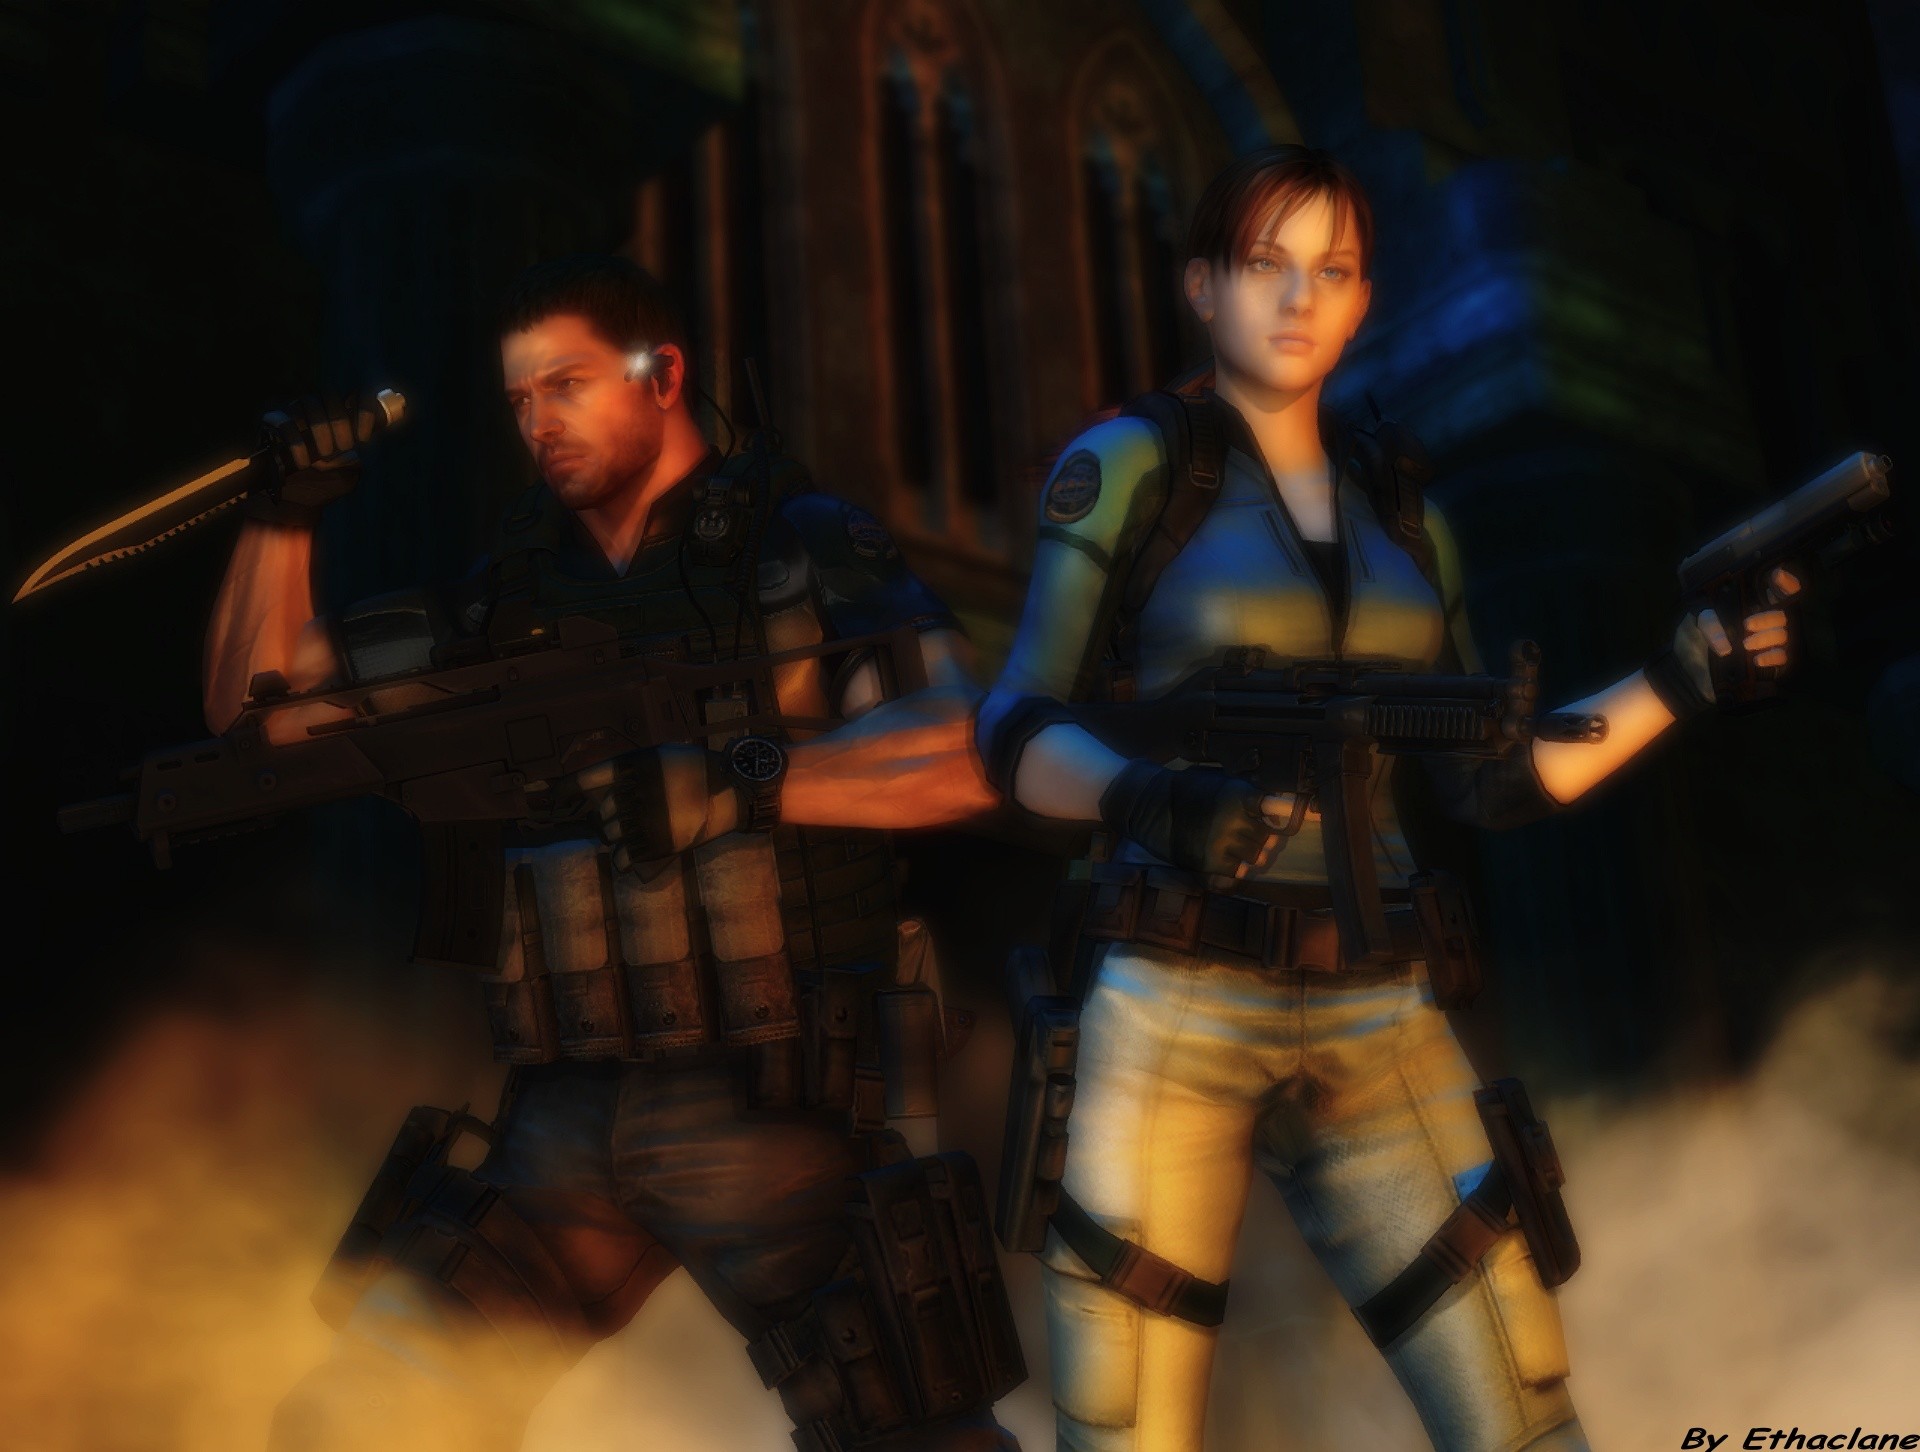 1920x1452 redfield37 368 161 Resident evil wallpaper Chris and Jill by ethaclane